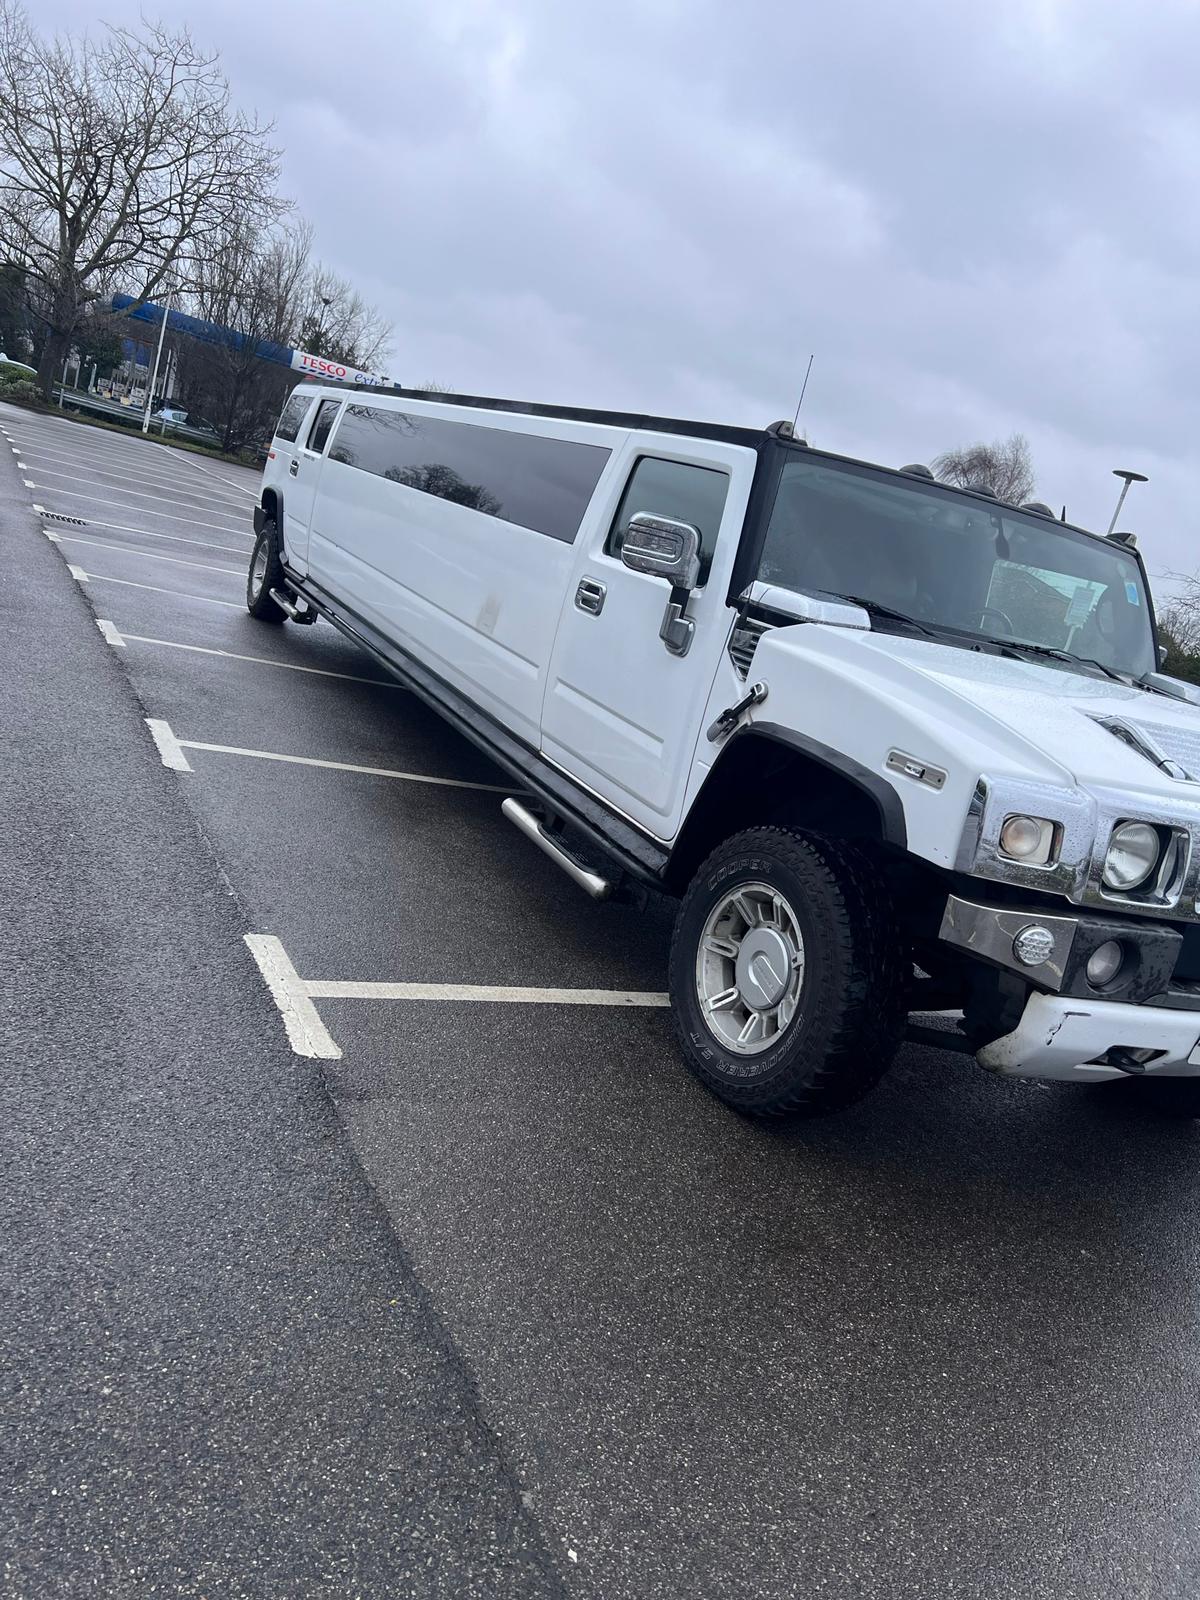 hummer hire service in london